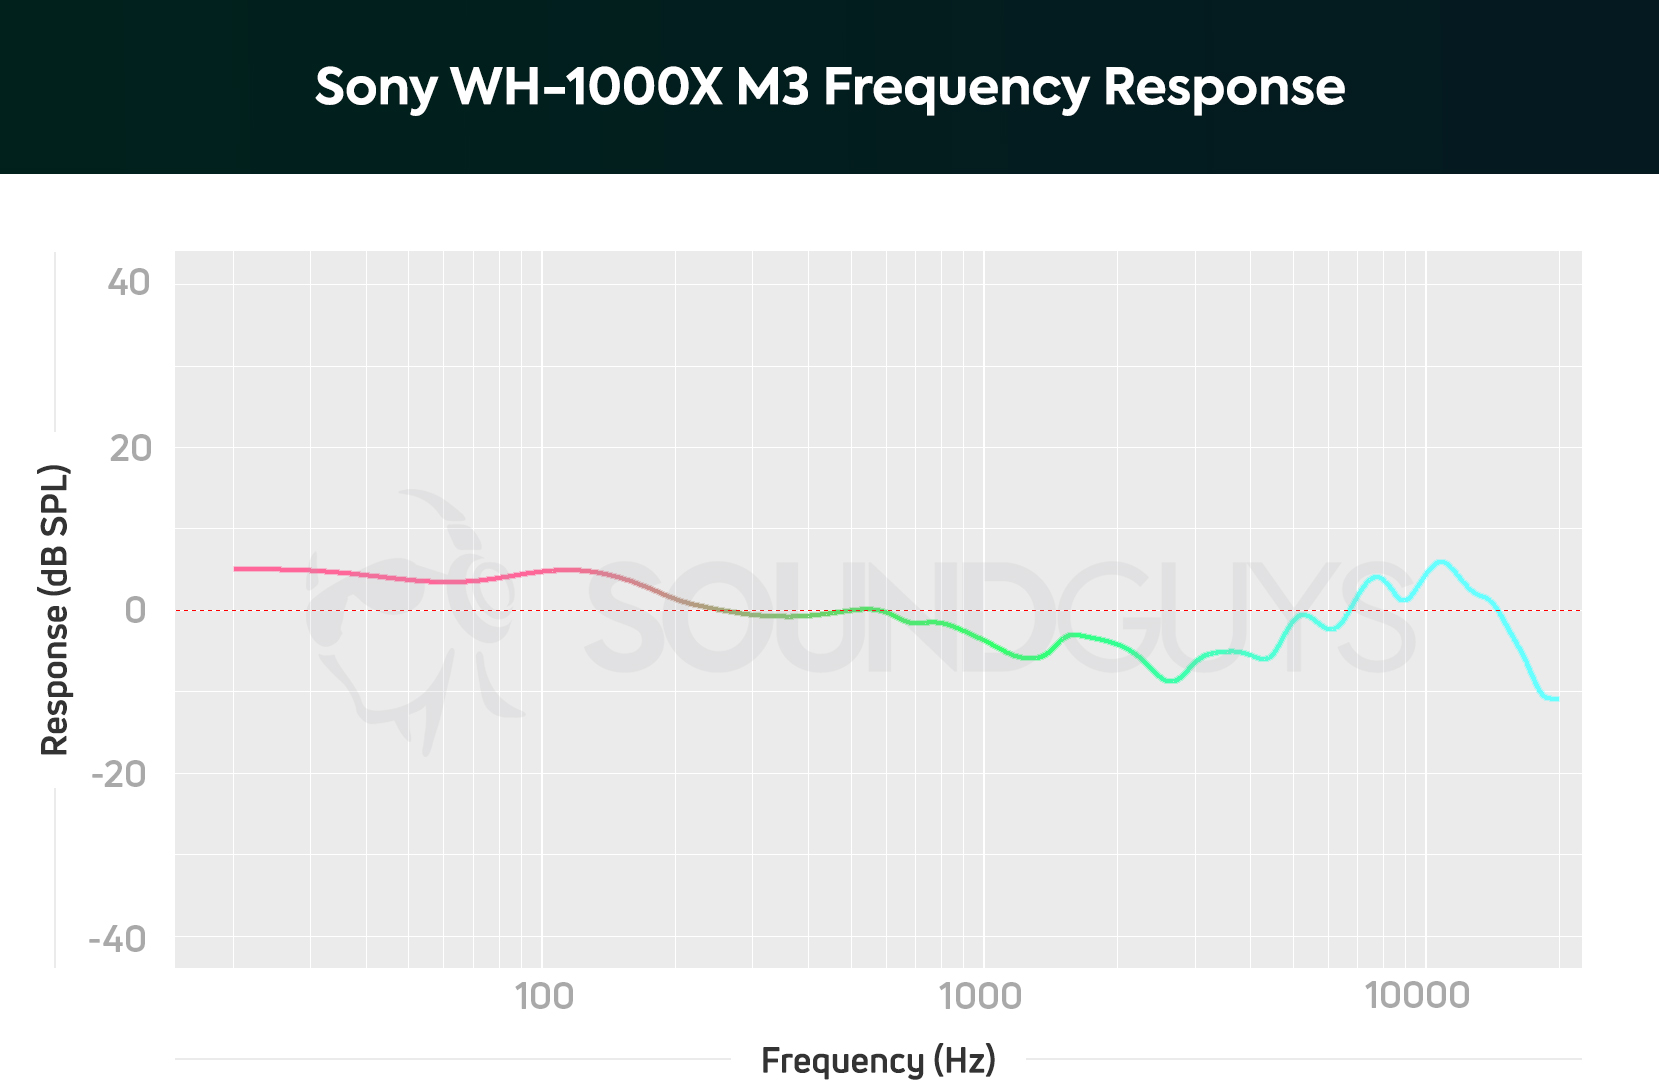 A chart showing the frequency response of the Sony WH-1000X M3.